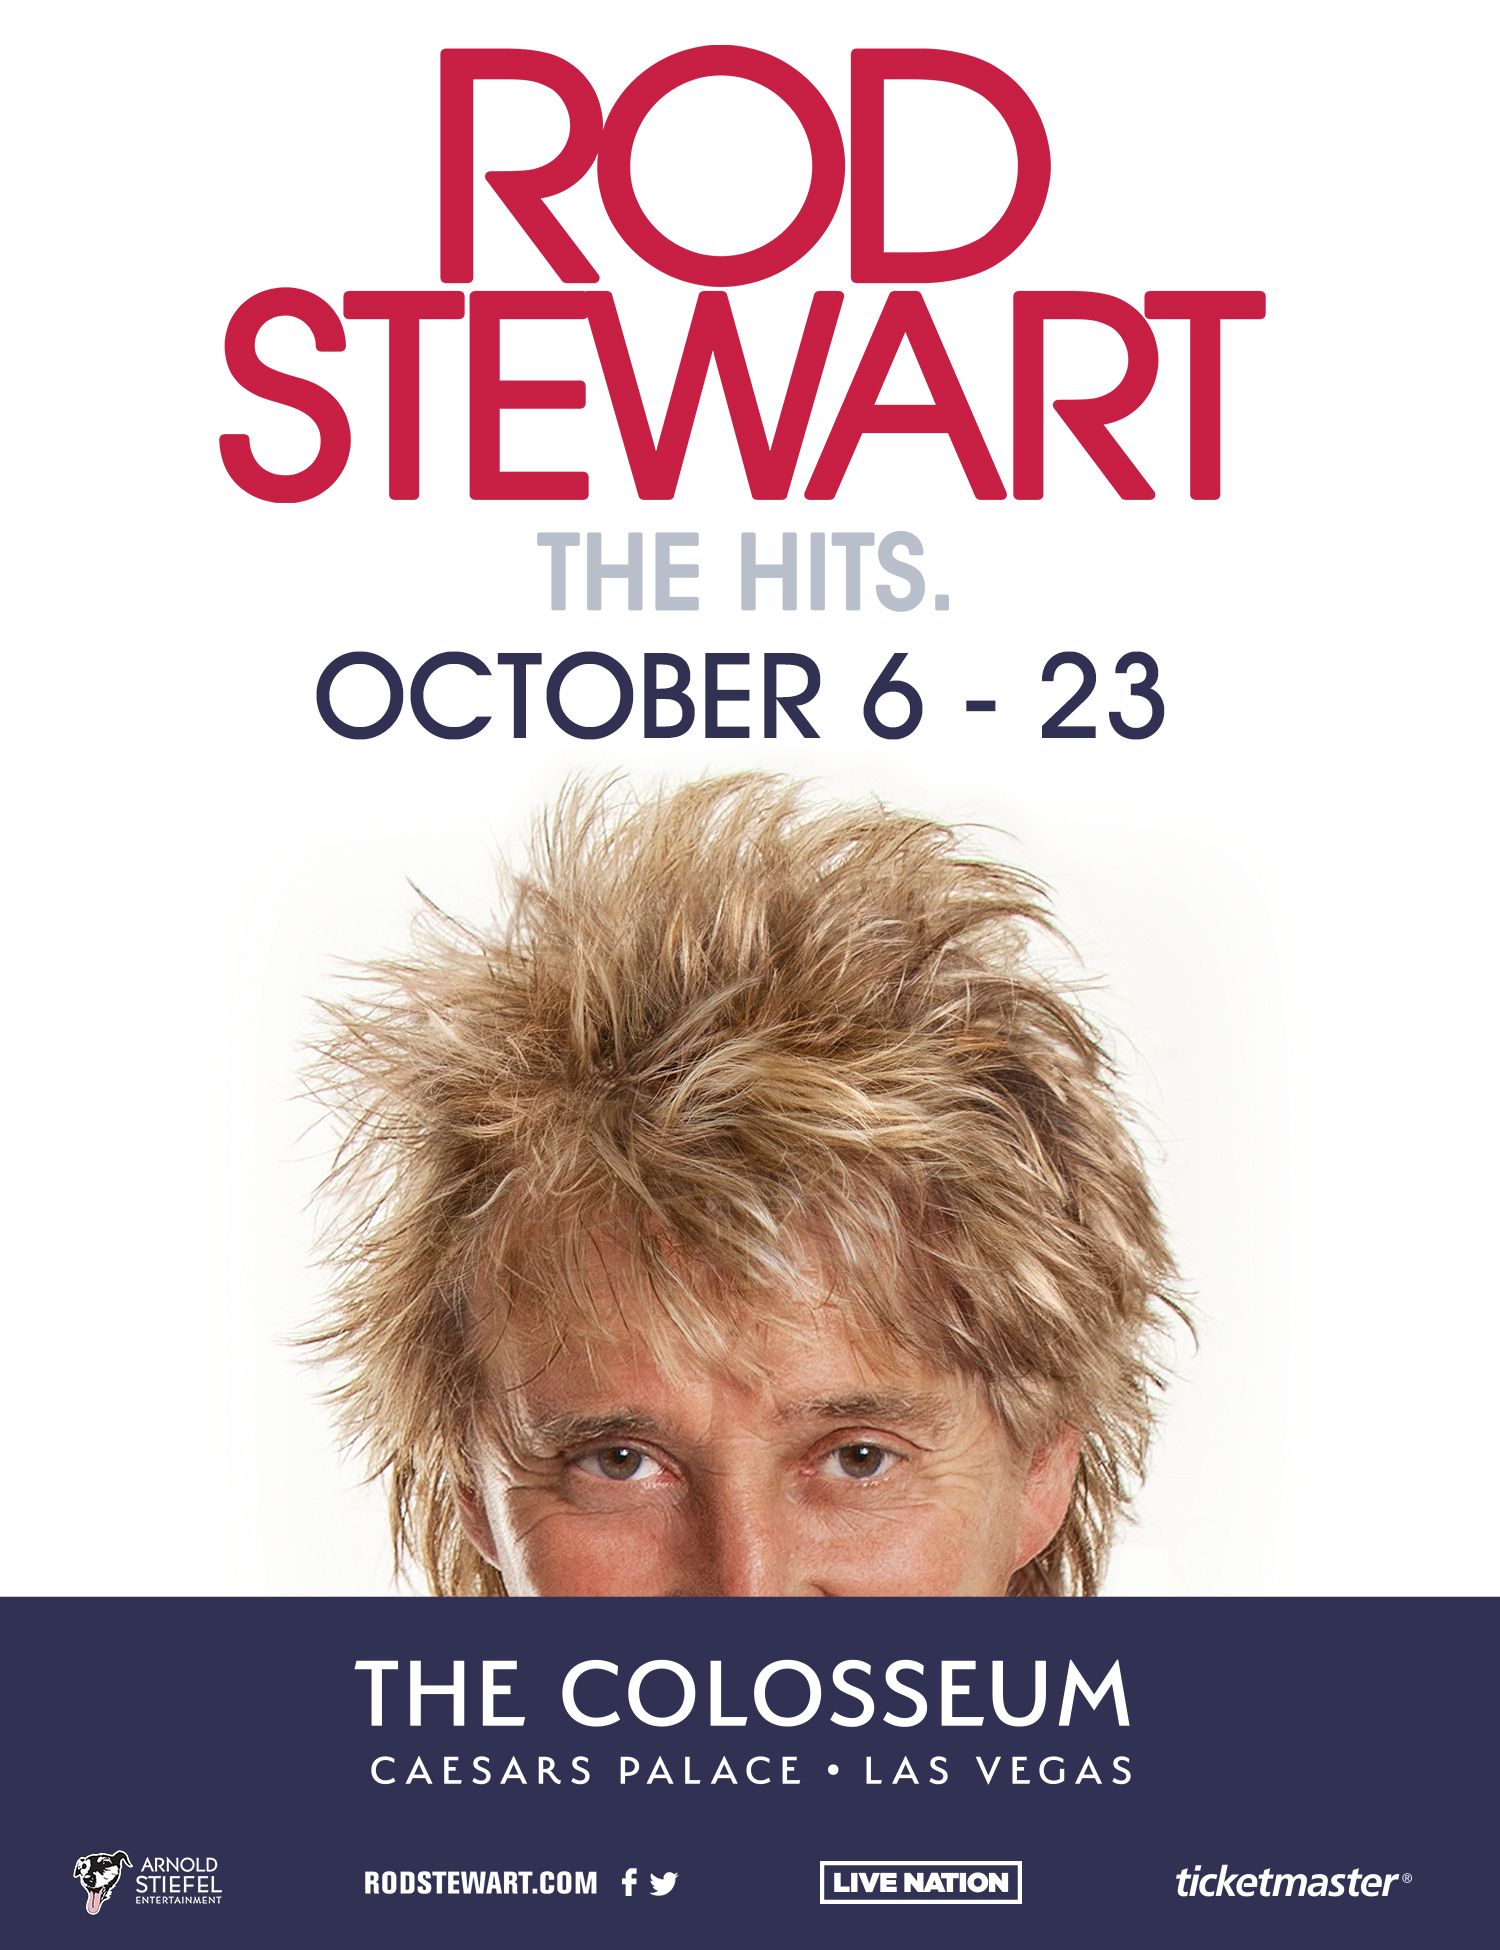 Rod Stewart Celebrates 10th Anniversary Of “Rod Stewart: The Hits” By Announcing 2021 Las Vegas Residency At Caesars Palace October 6 – 23, 2021